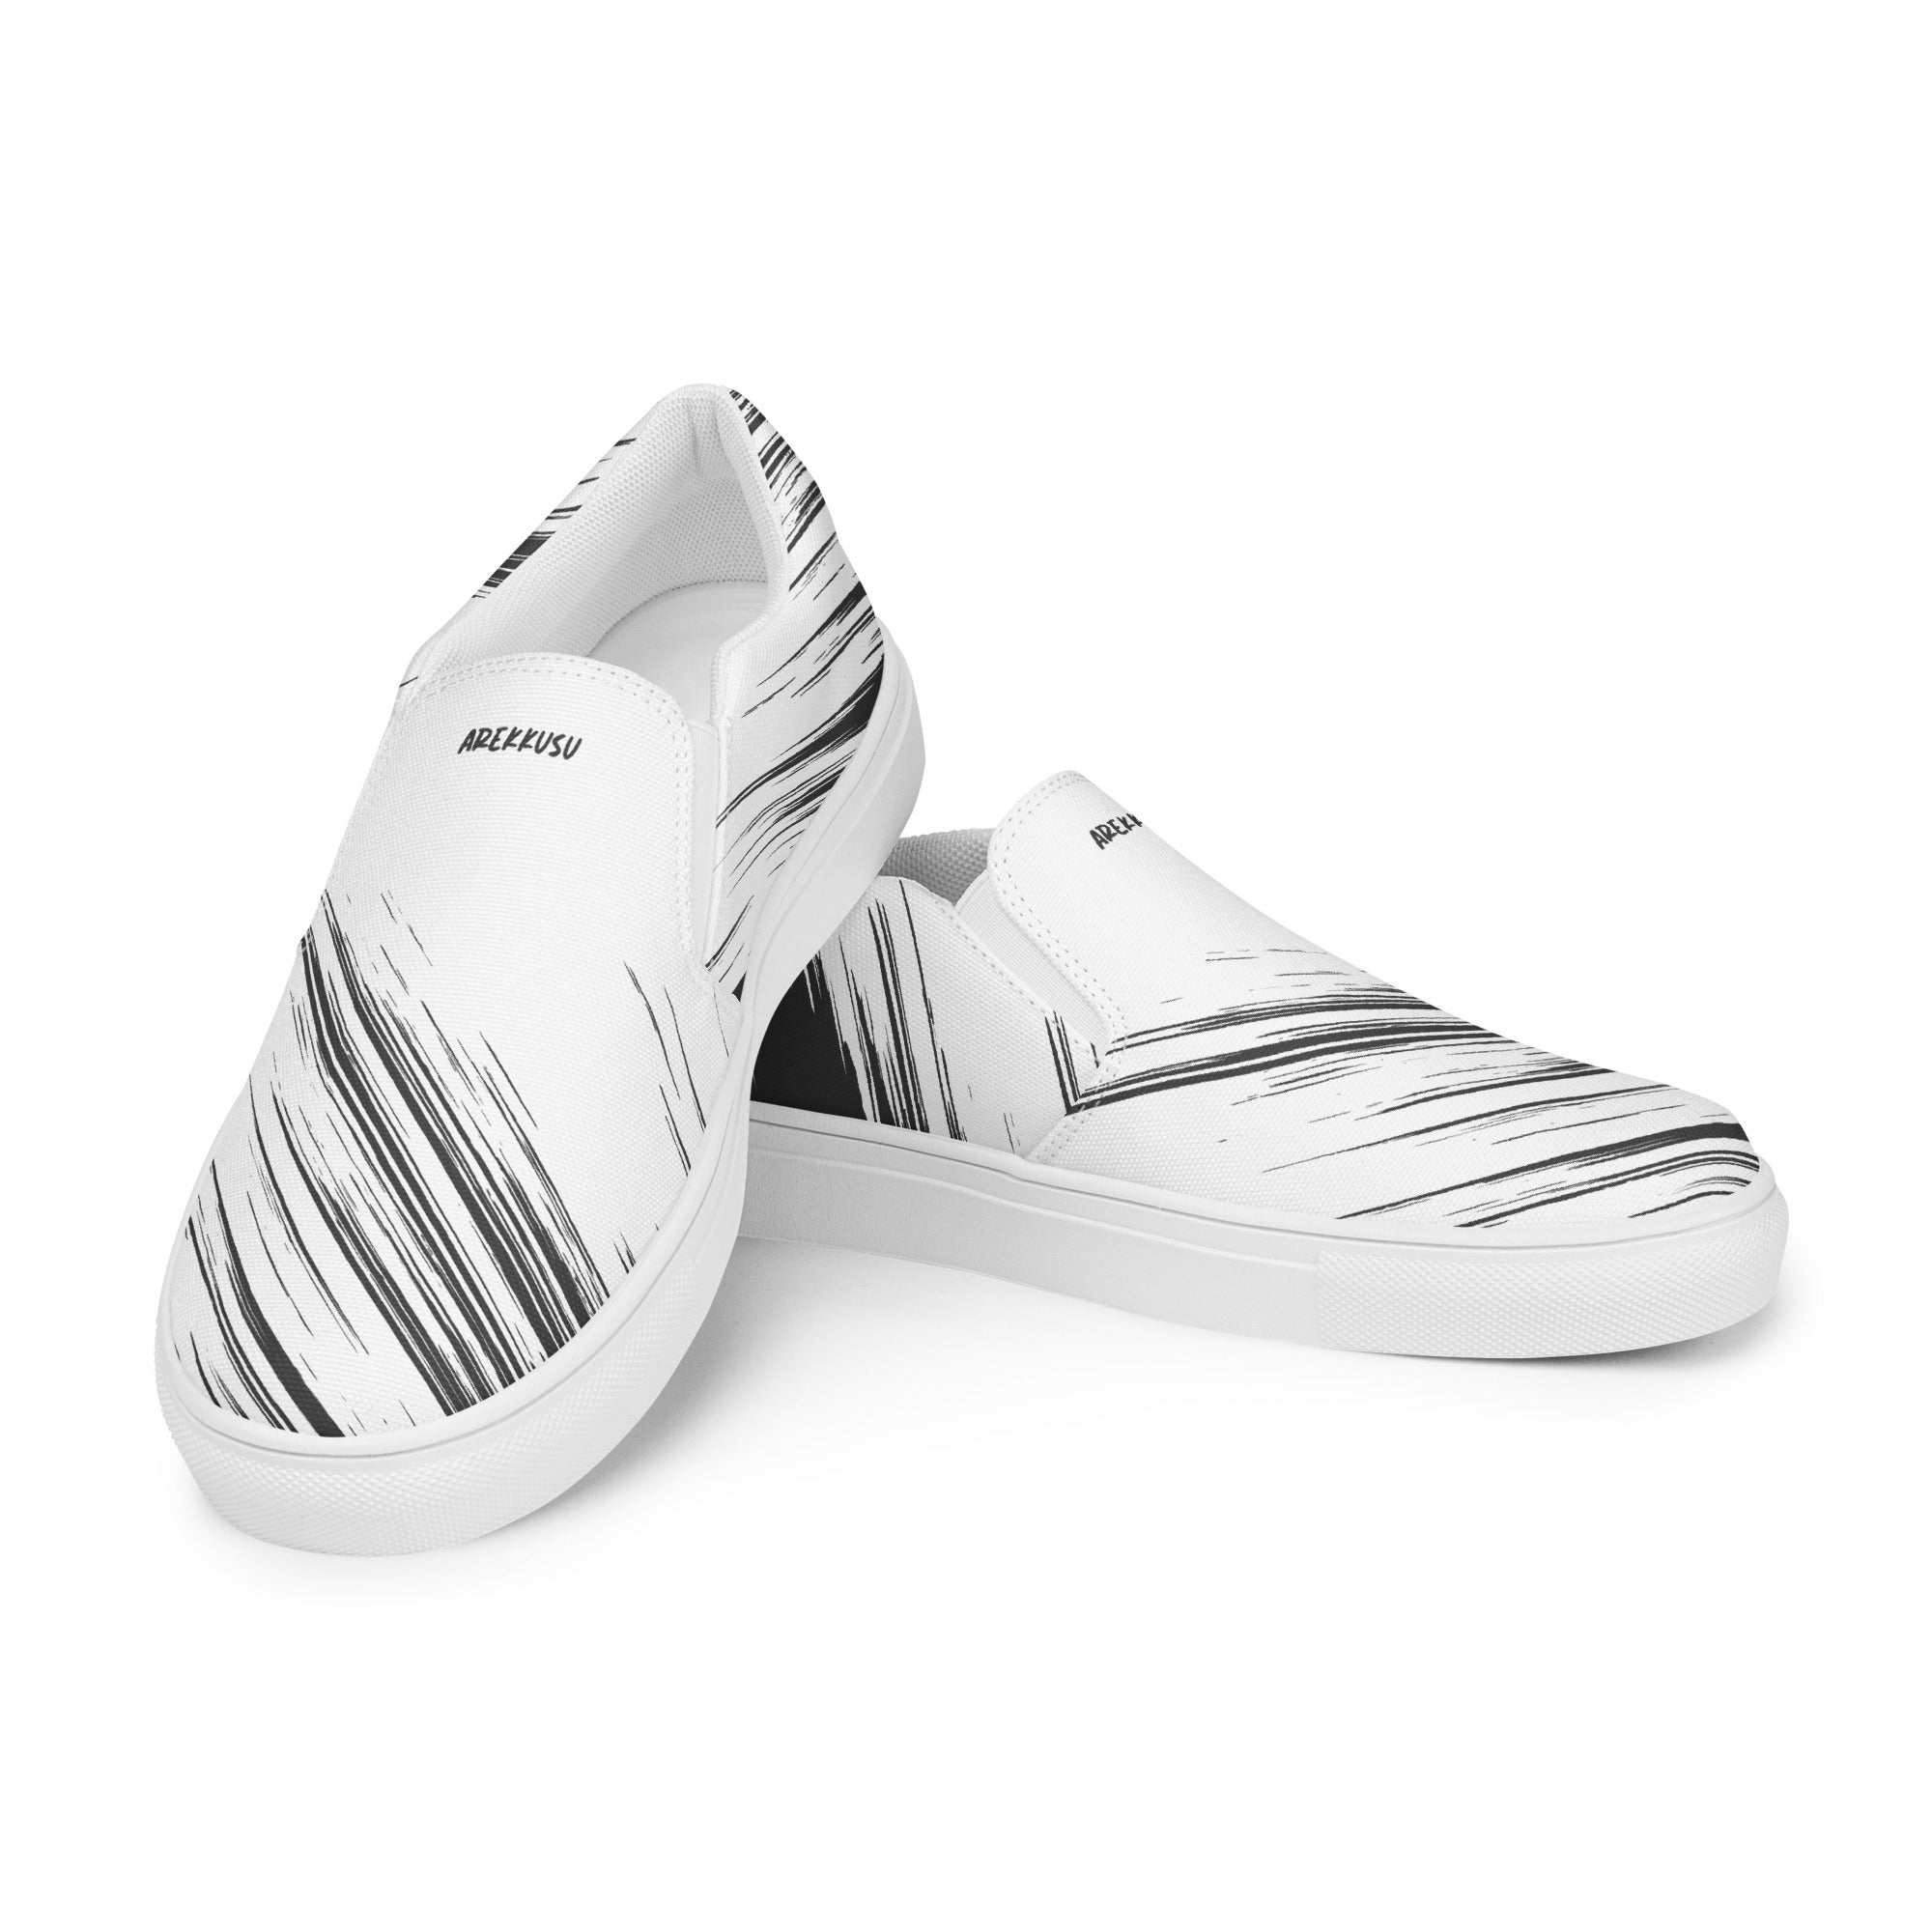 Gents' Slip-On Canvas Shoes